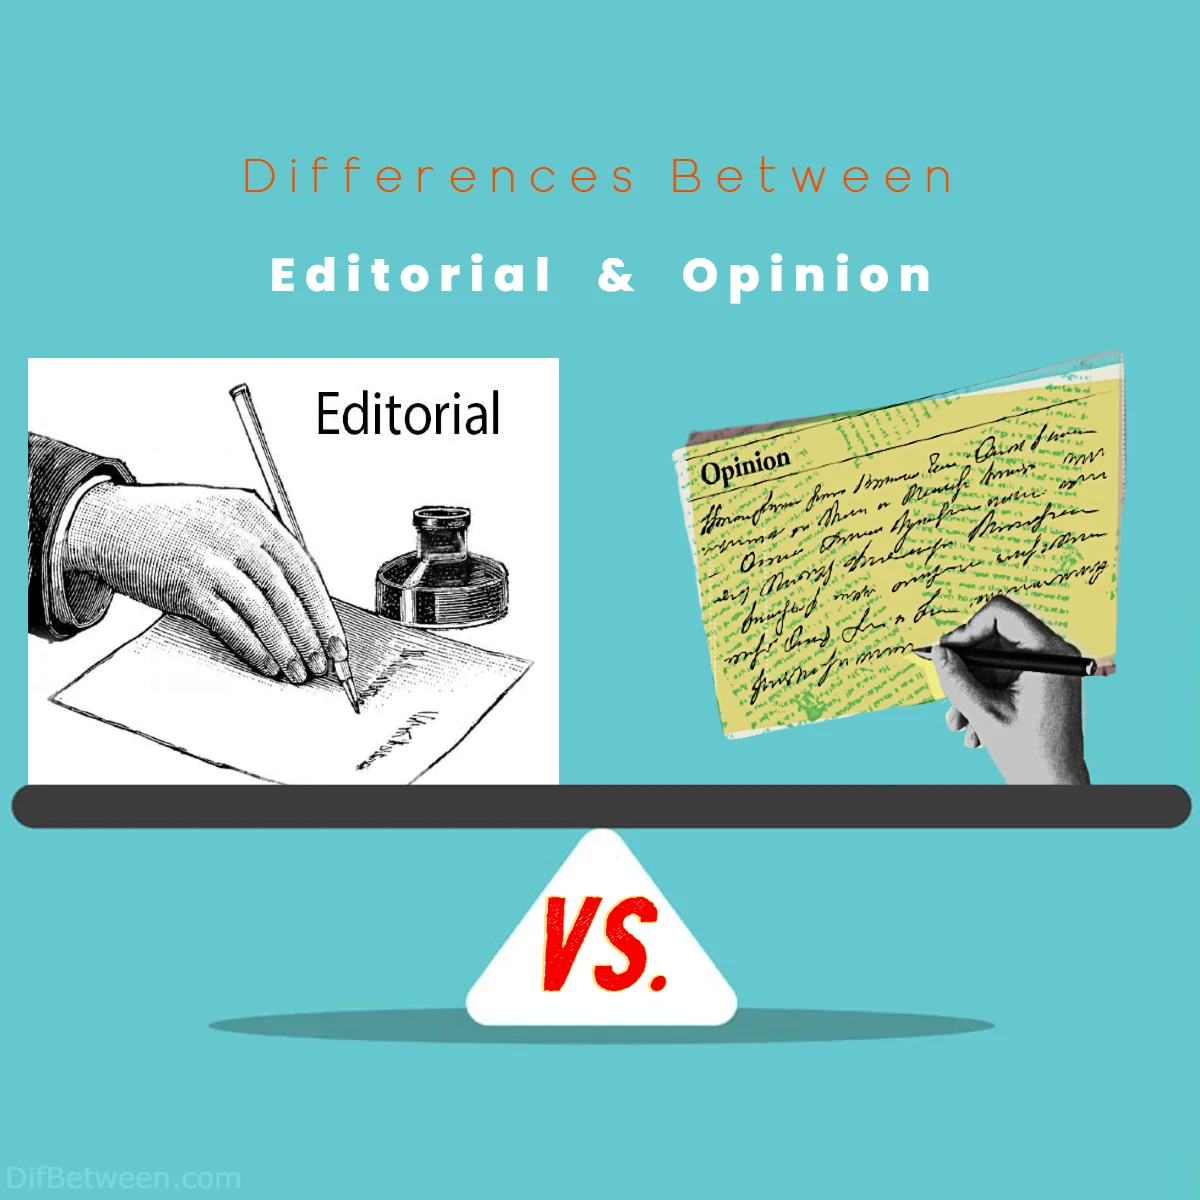 Differences Between Editorial vs Opinion